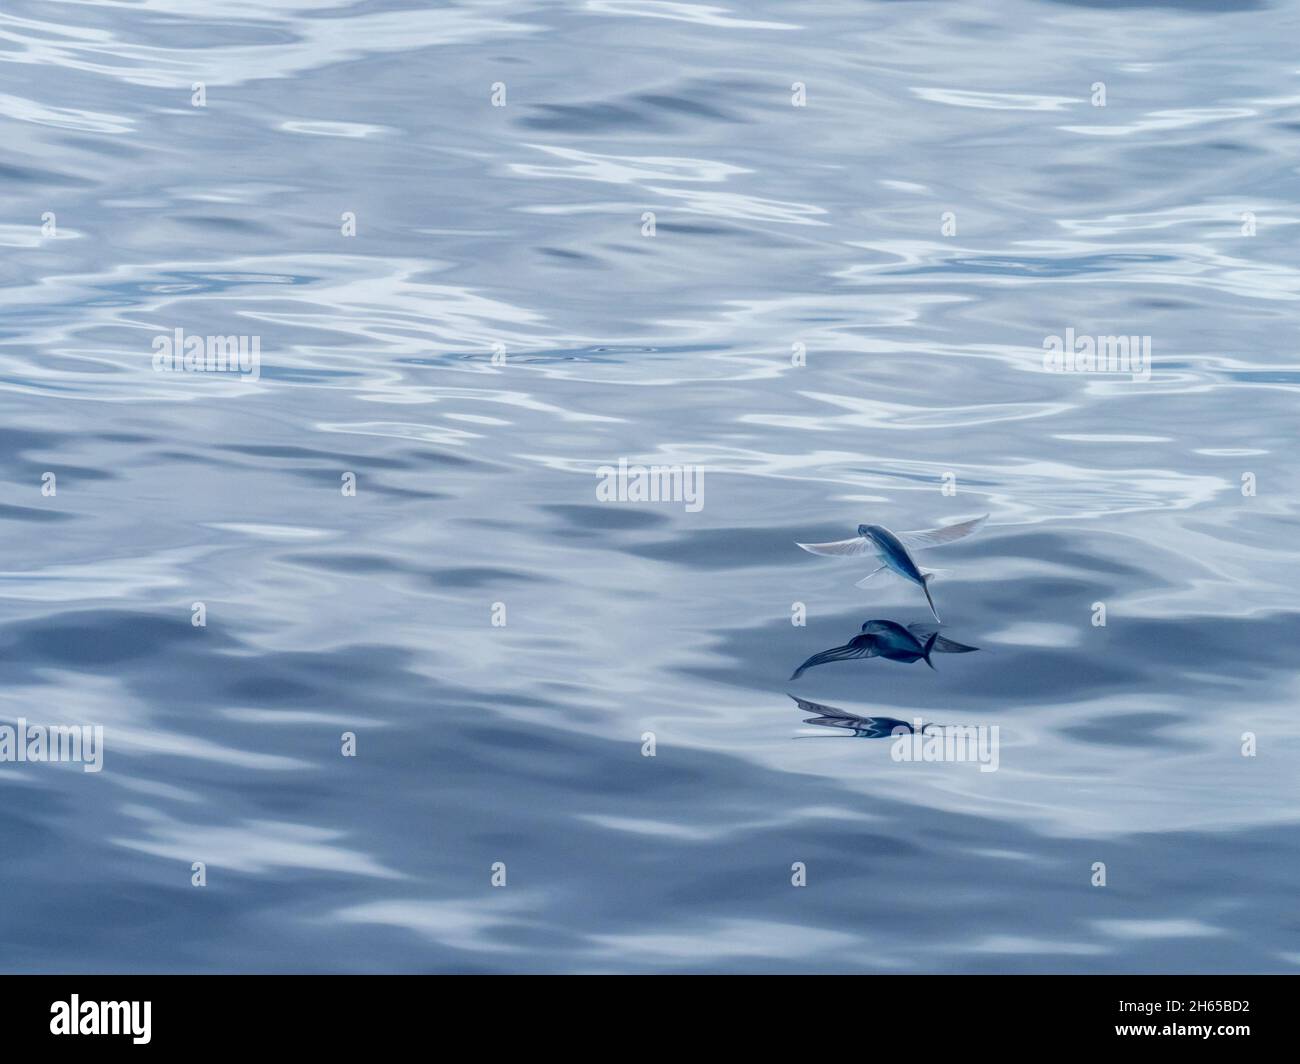 Flying fish, in the family Exocoetidae, while crossing the Atlantic Ocean on the expedition ship National Geographic Resolution Stock Photo